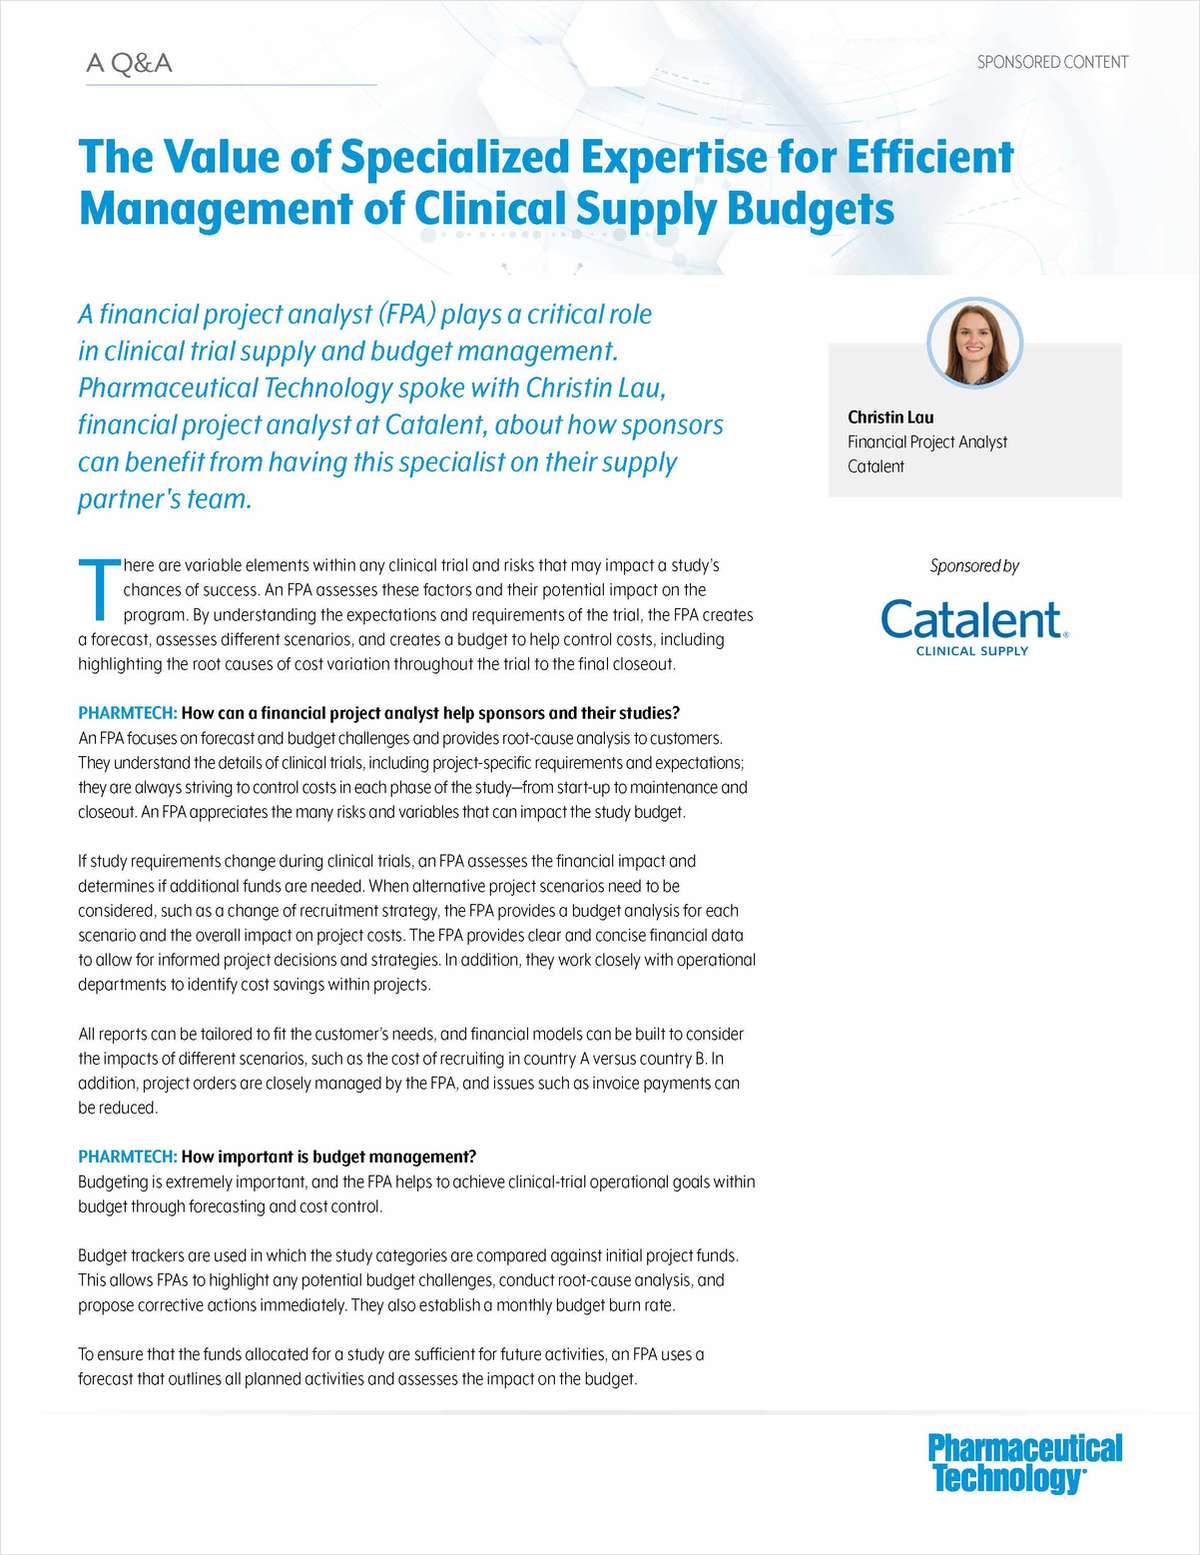 Specialized Expertise for Management of Clinical Supply Budgets